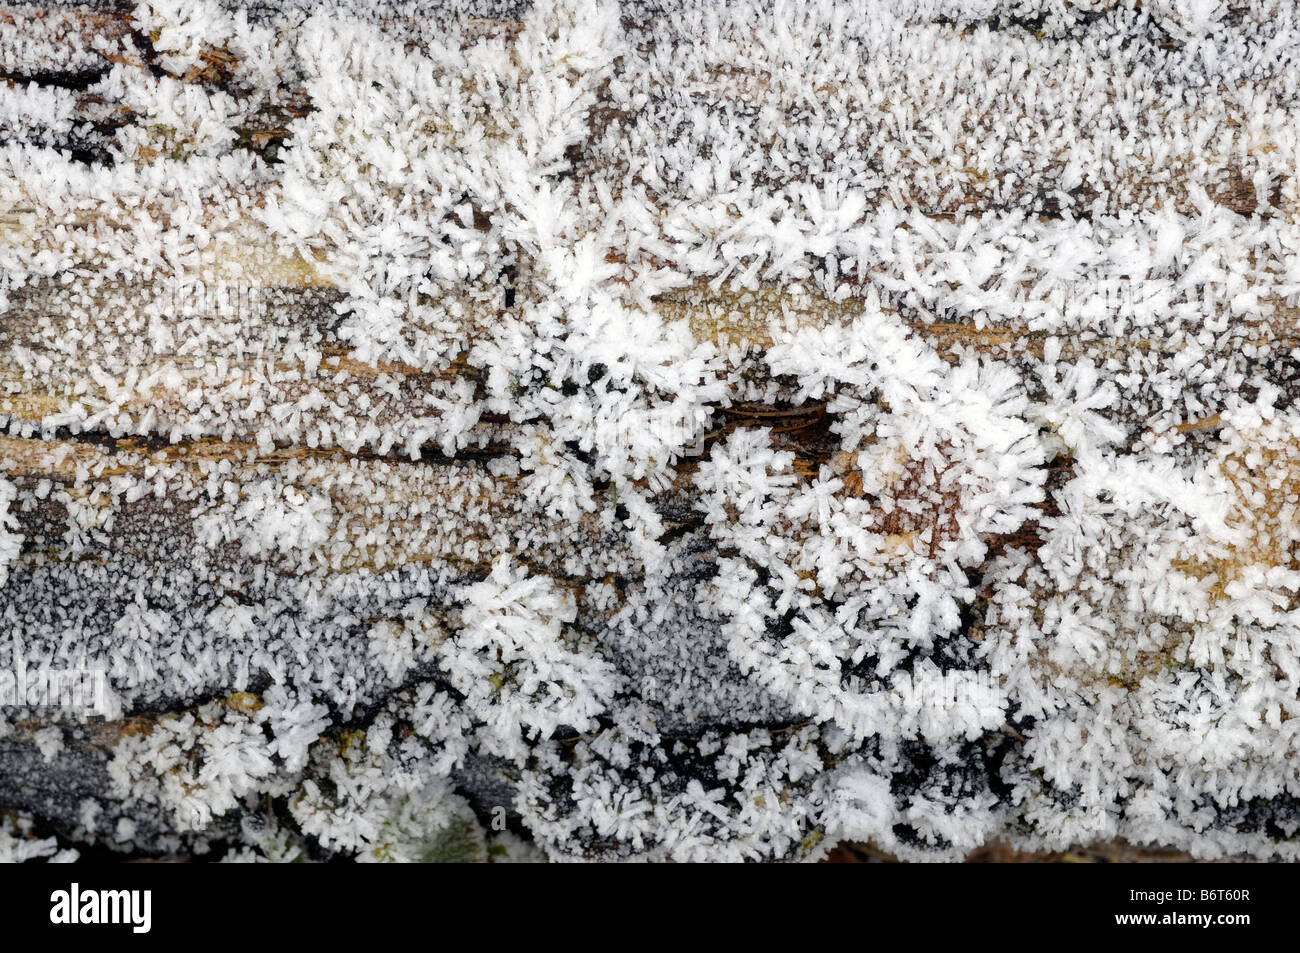 Hoarfrost on a fungus covered log Stock Photo